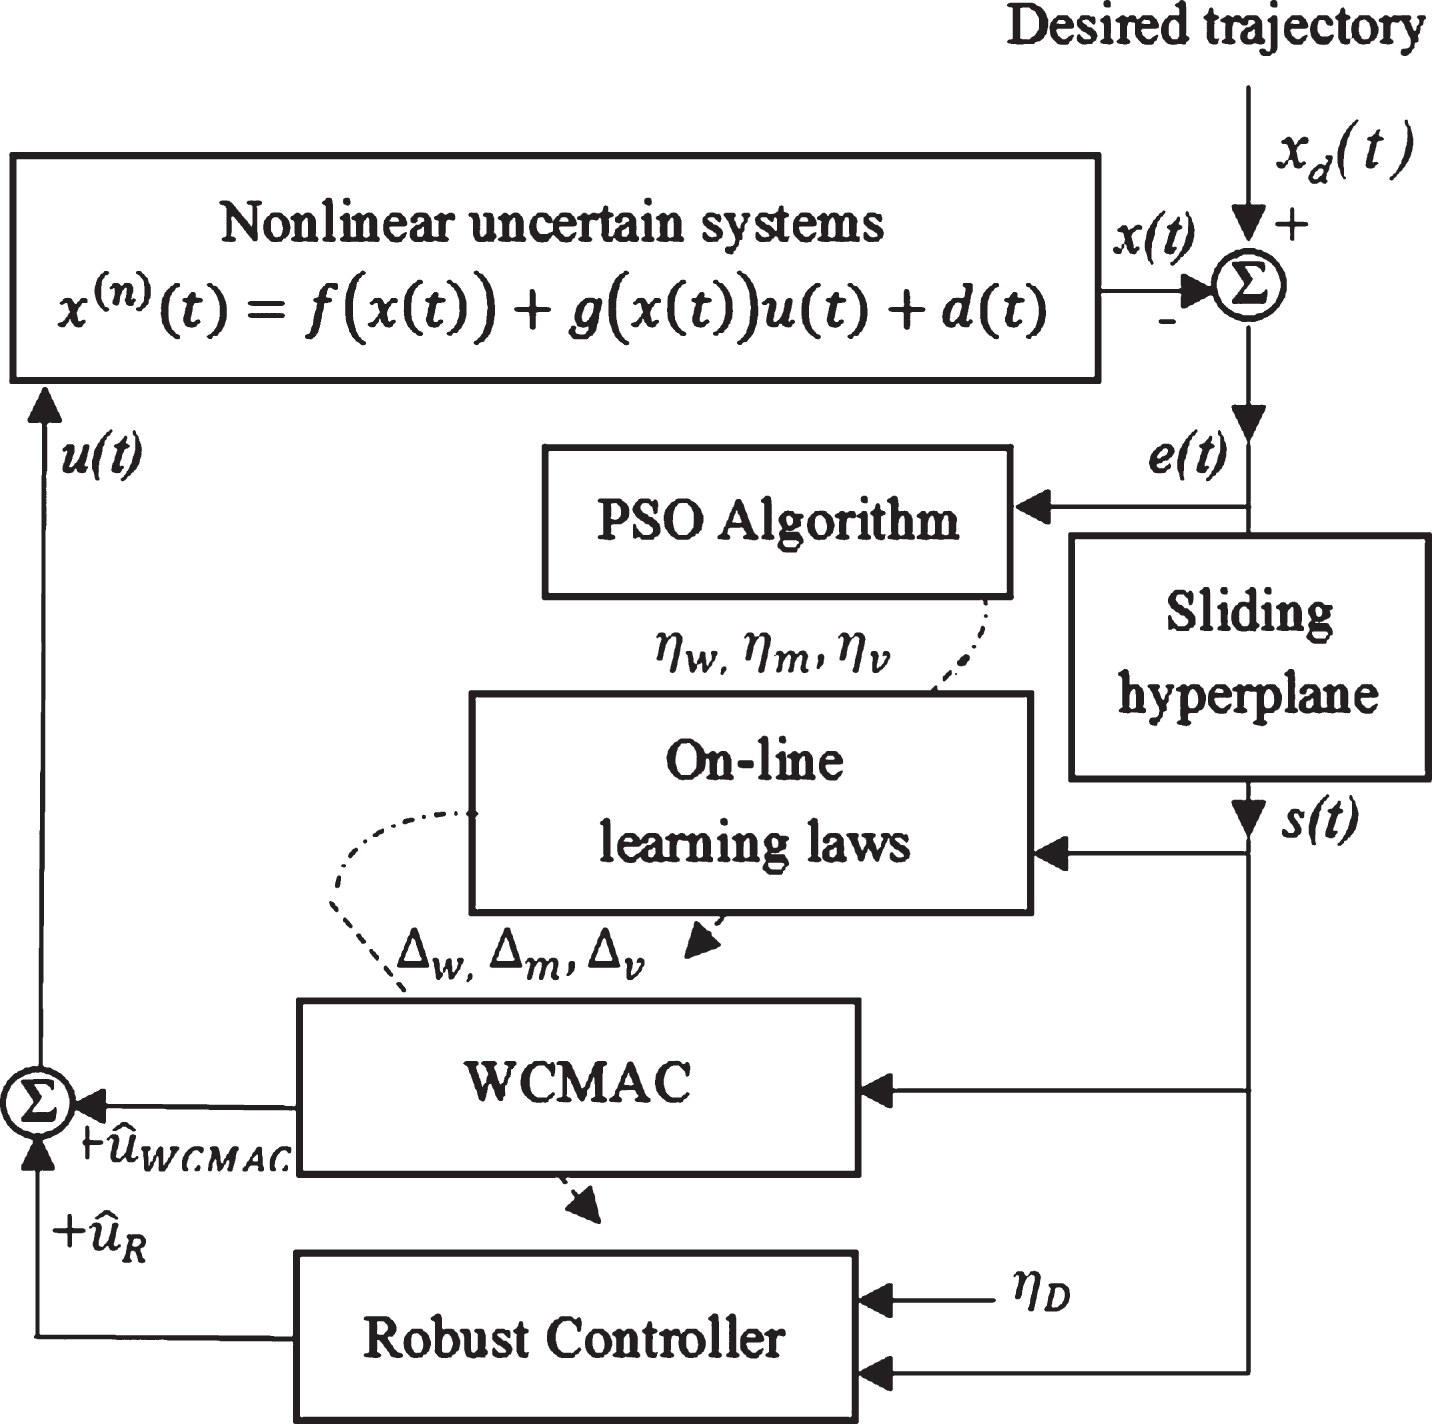 WCMAC-based control system design for nonlinear systems using PSO -  IOS Press